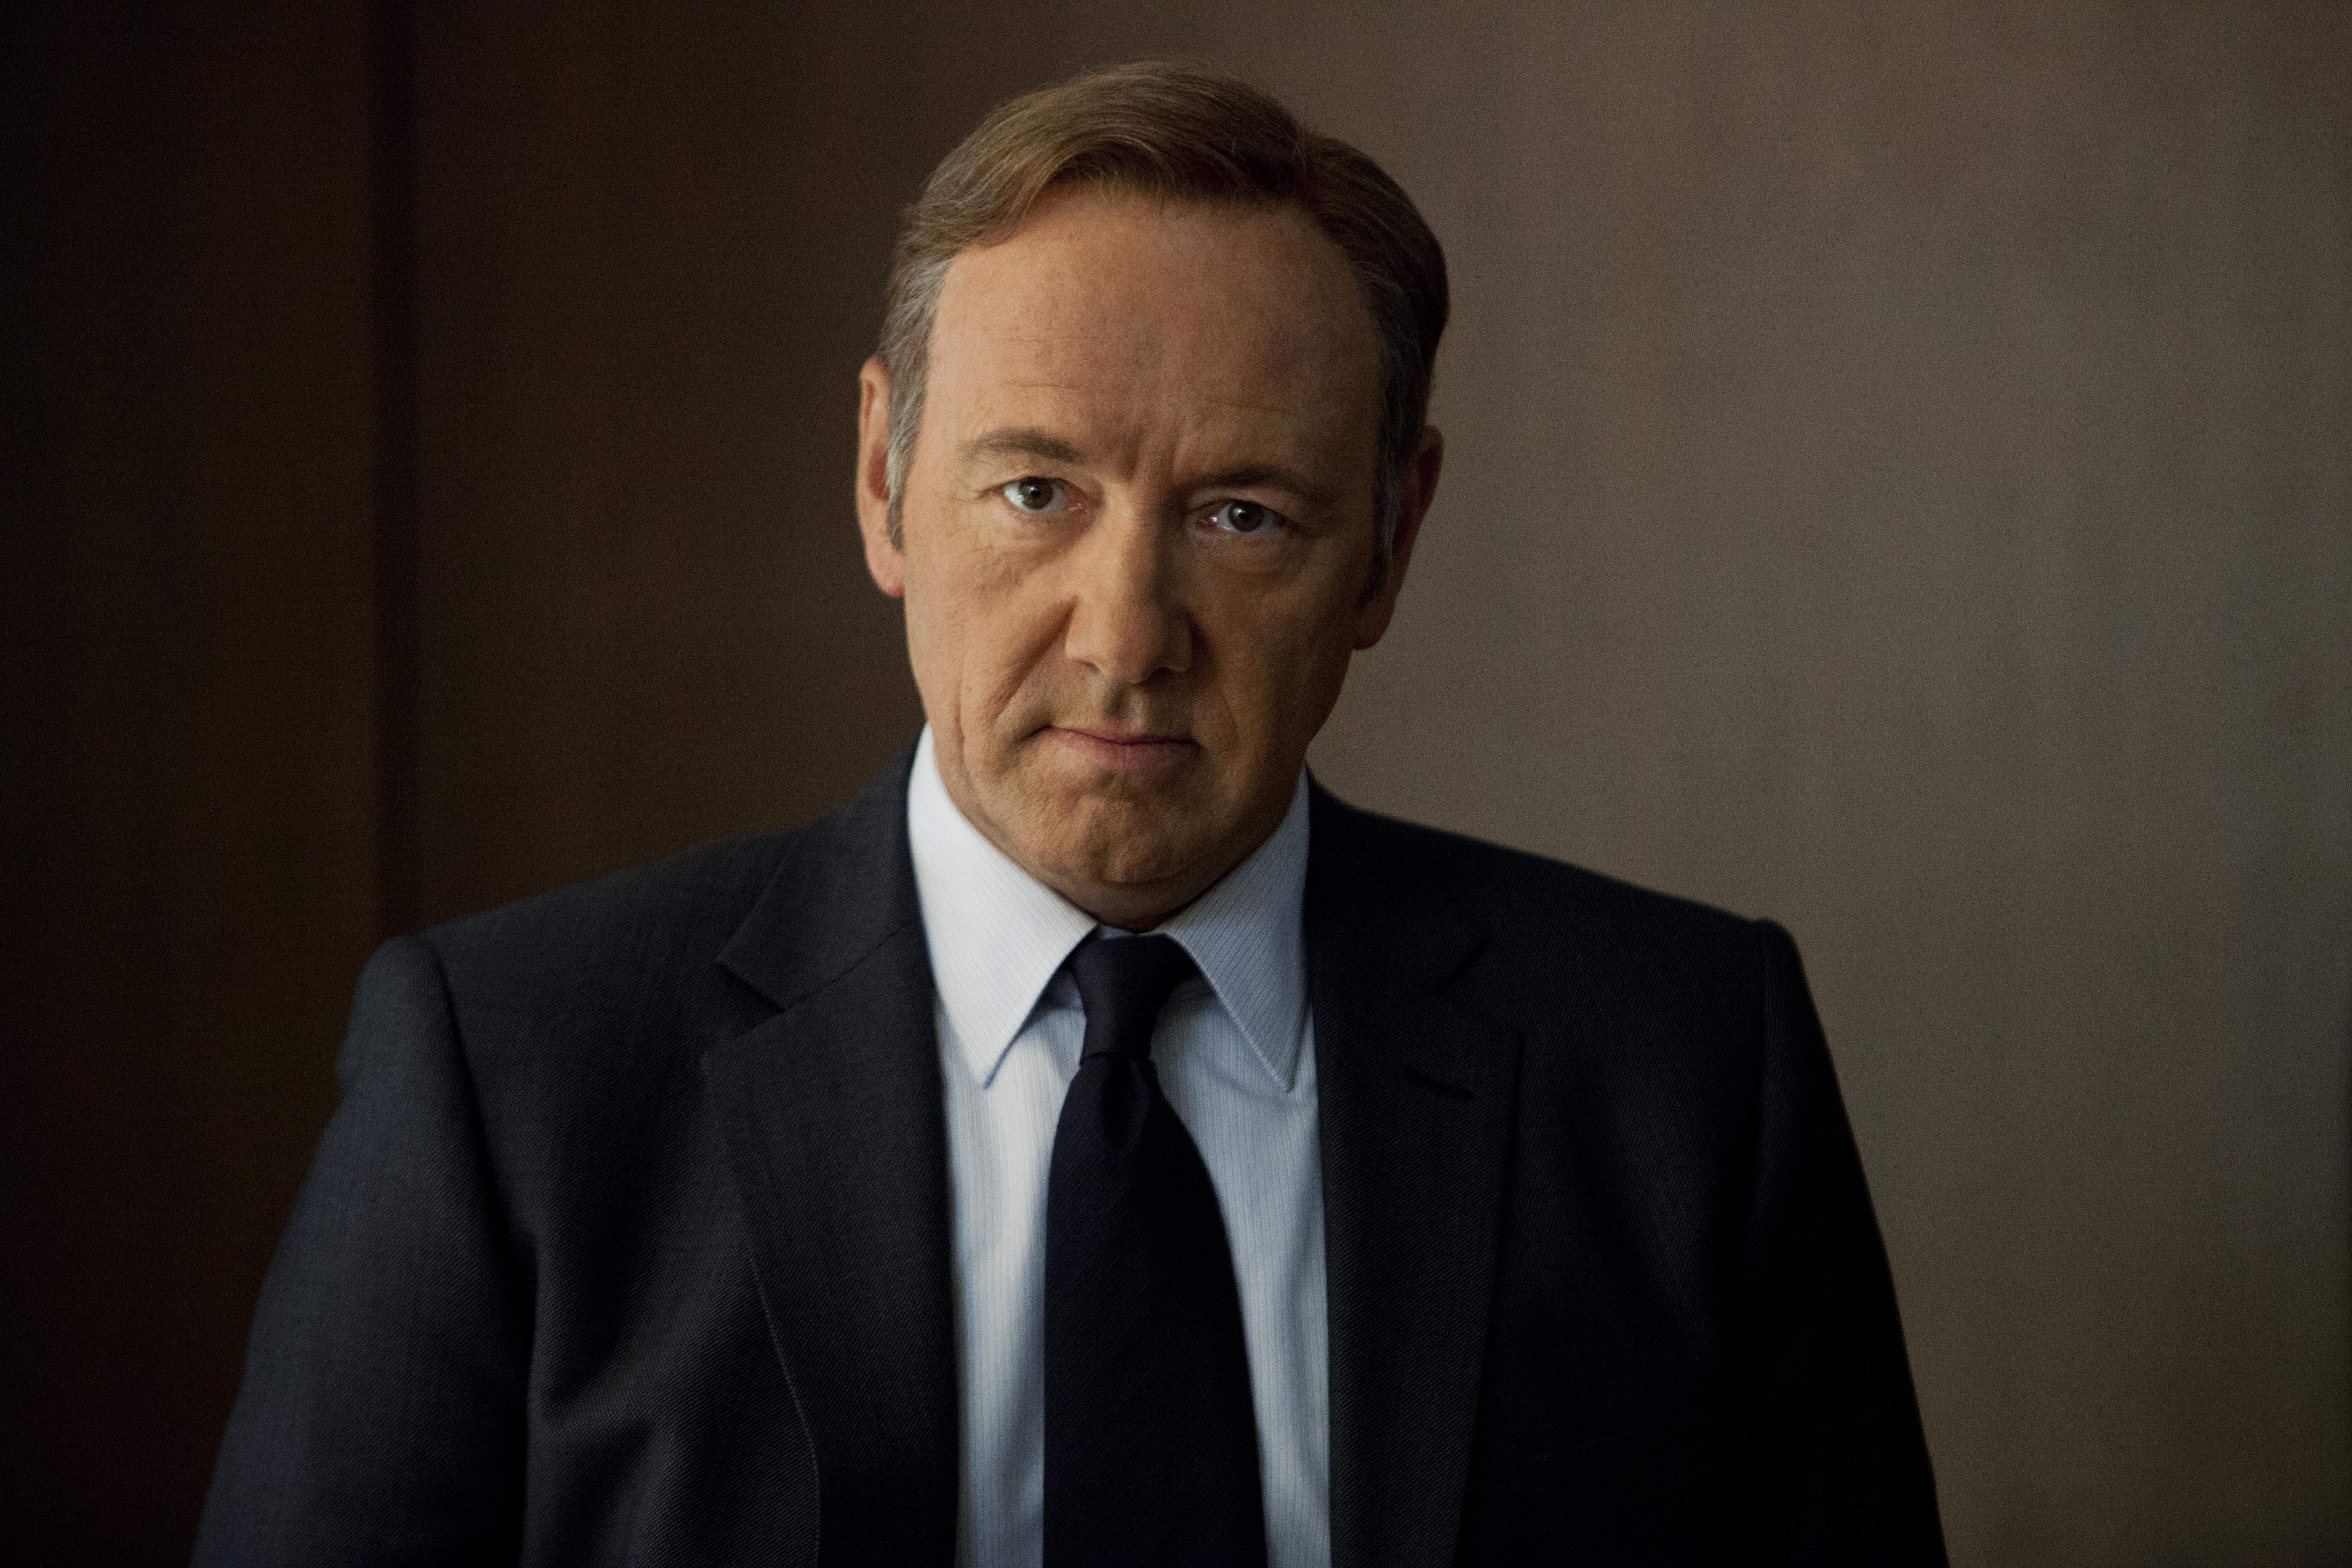 Kevin Spacey #10